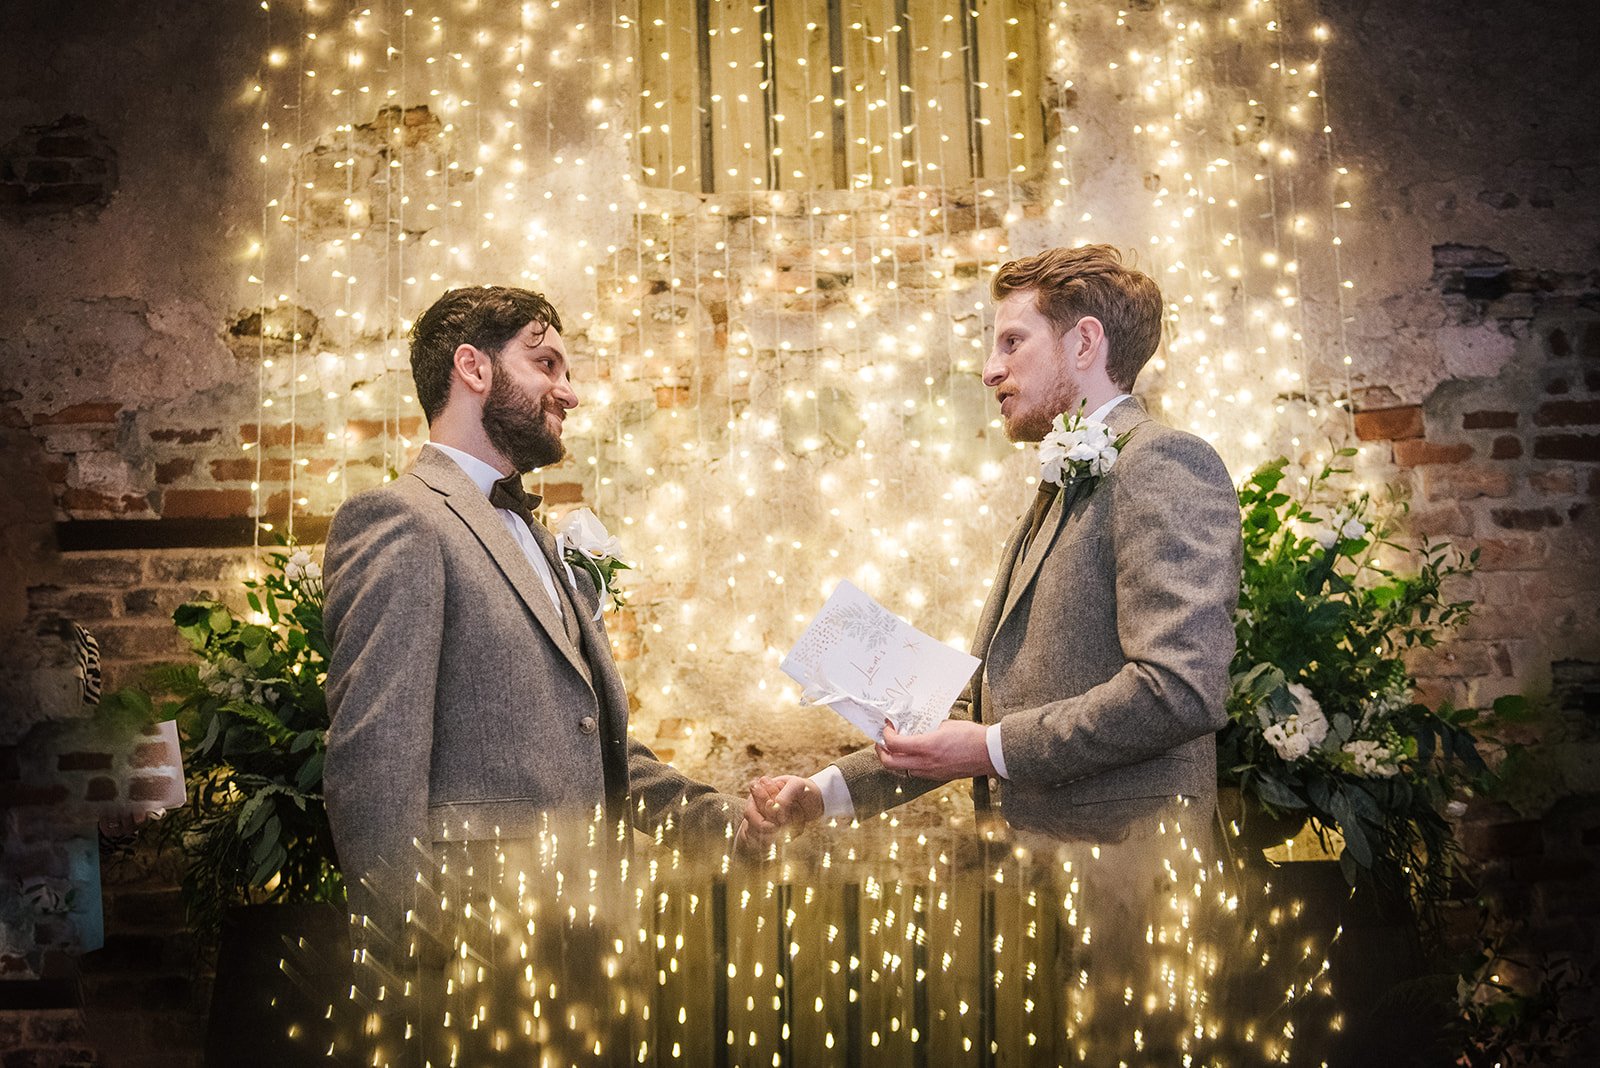 Personalised vows exchanged in front of cascading fairy lights. Photo by Sugarbird Photography.jpg